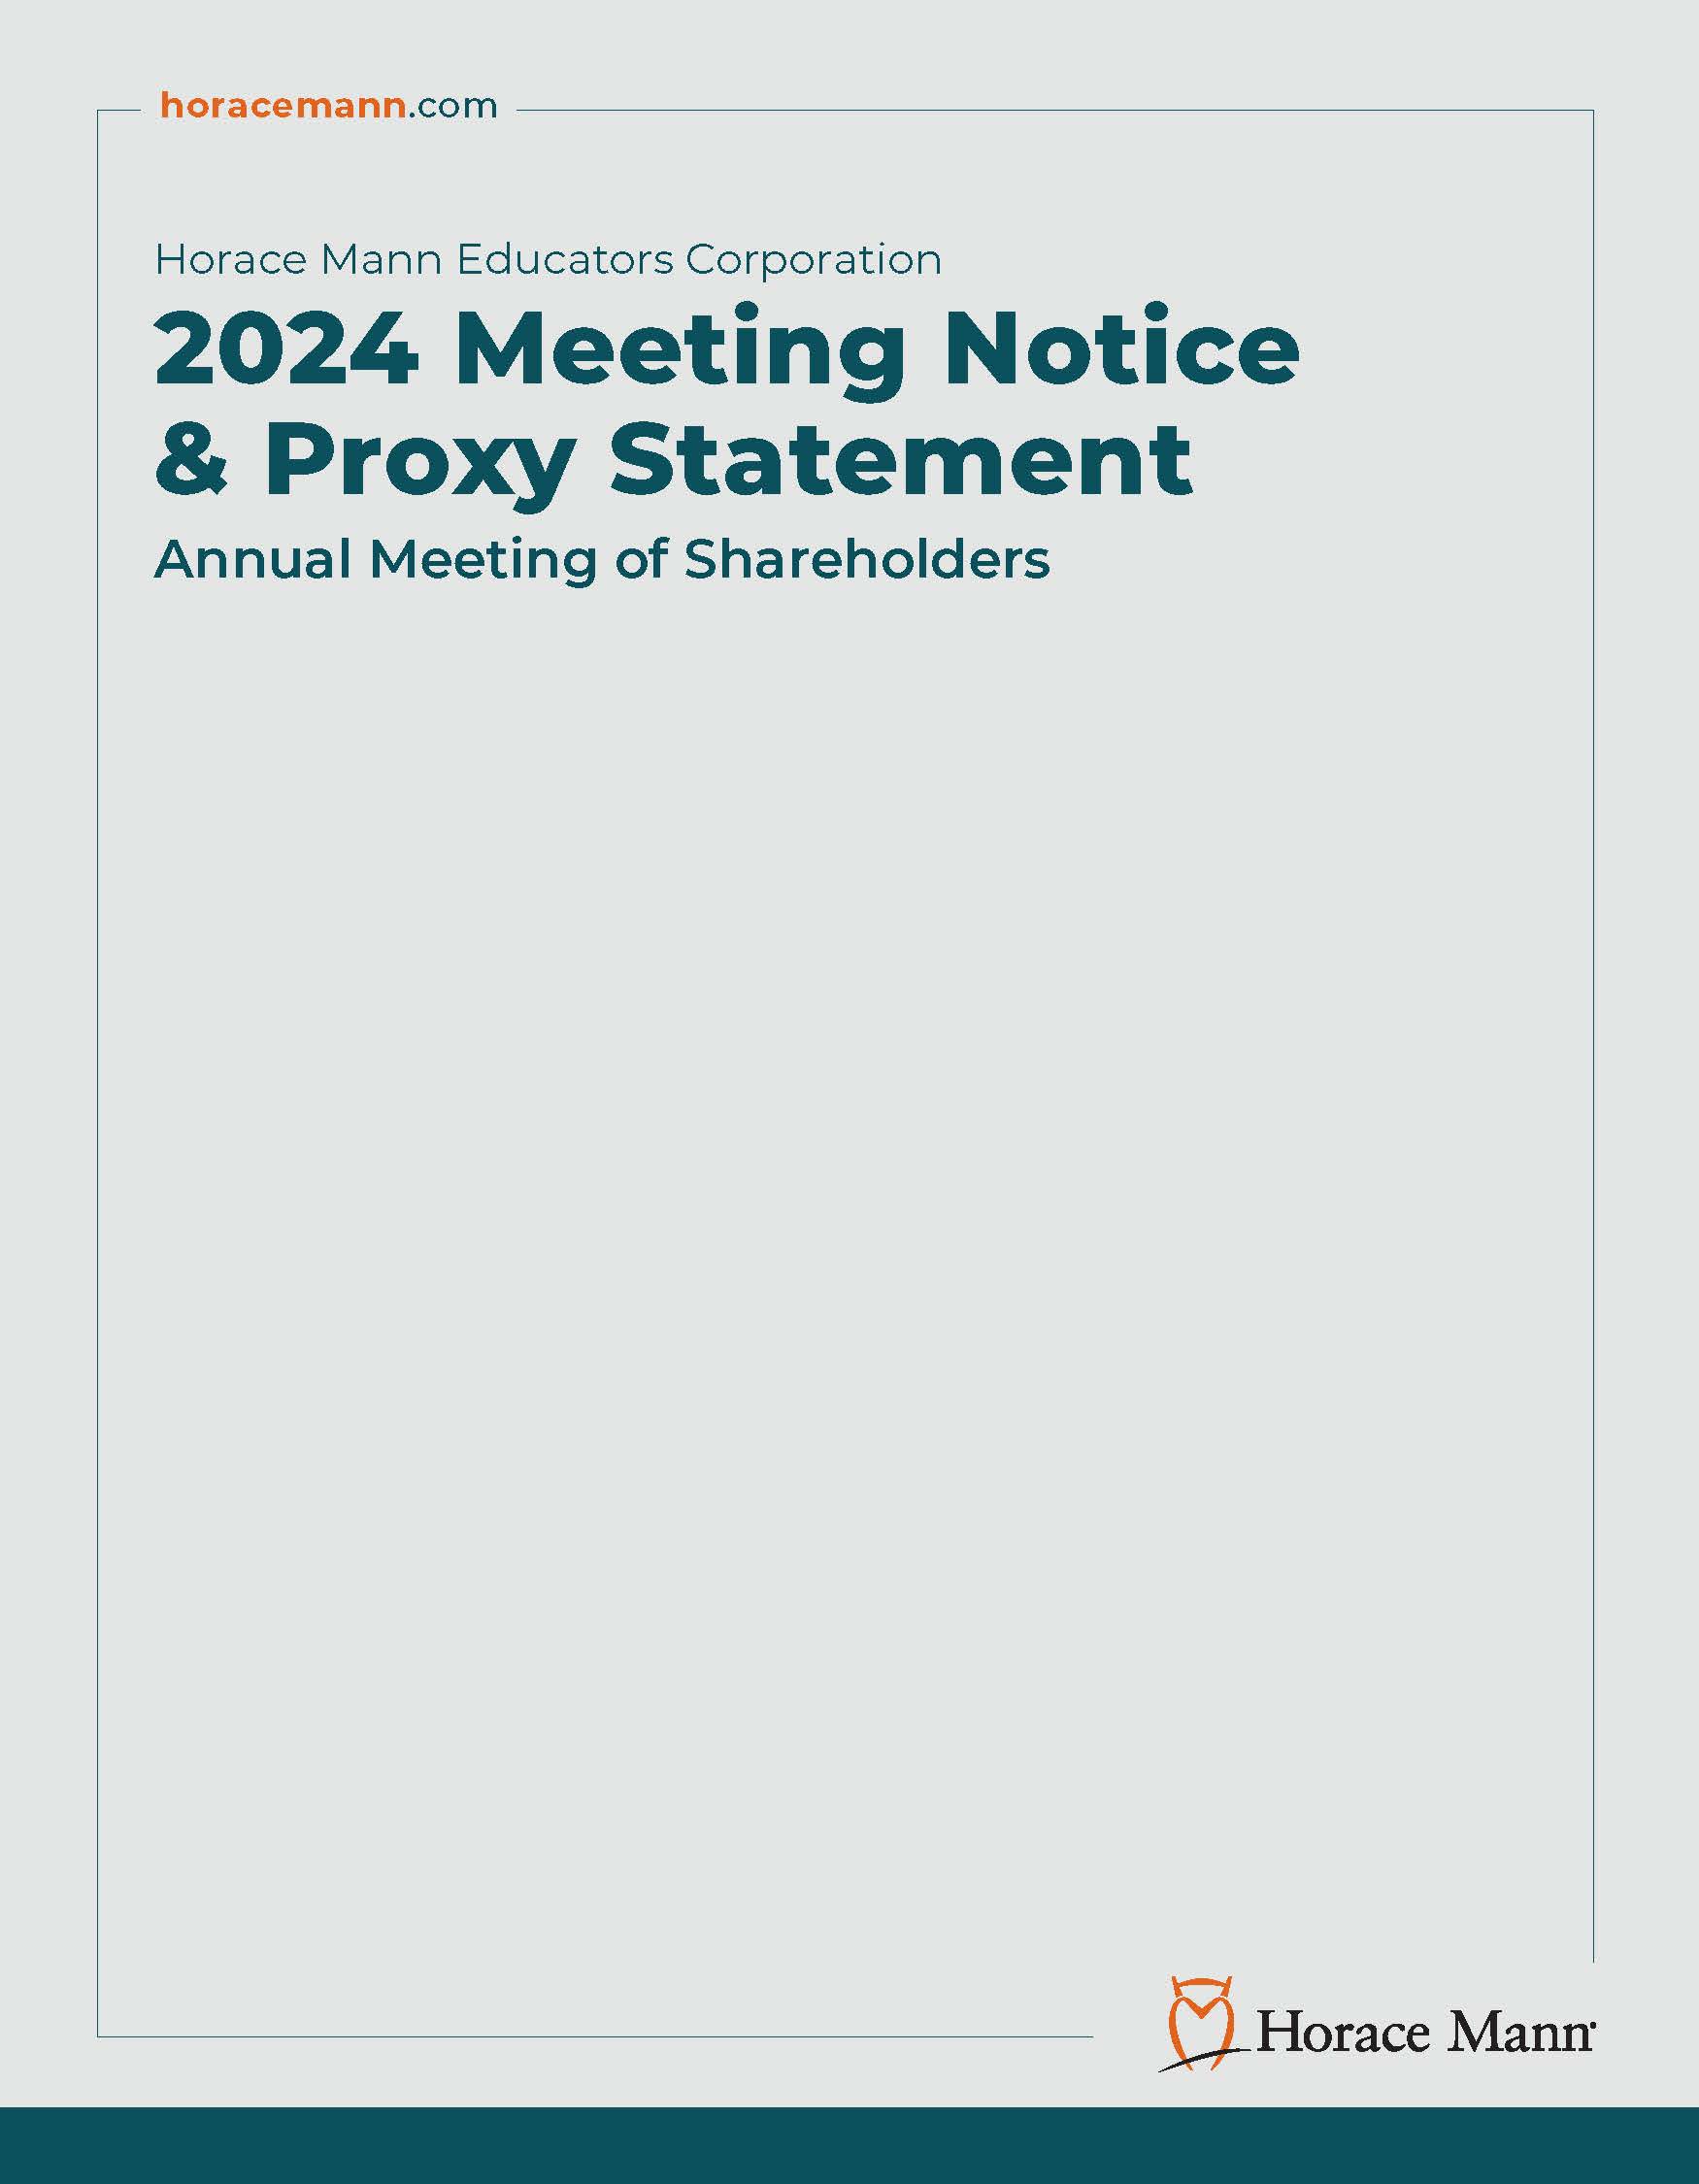 2024-HM-Proxy Statement Cover-With page bleeds_Page_1.jpg